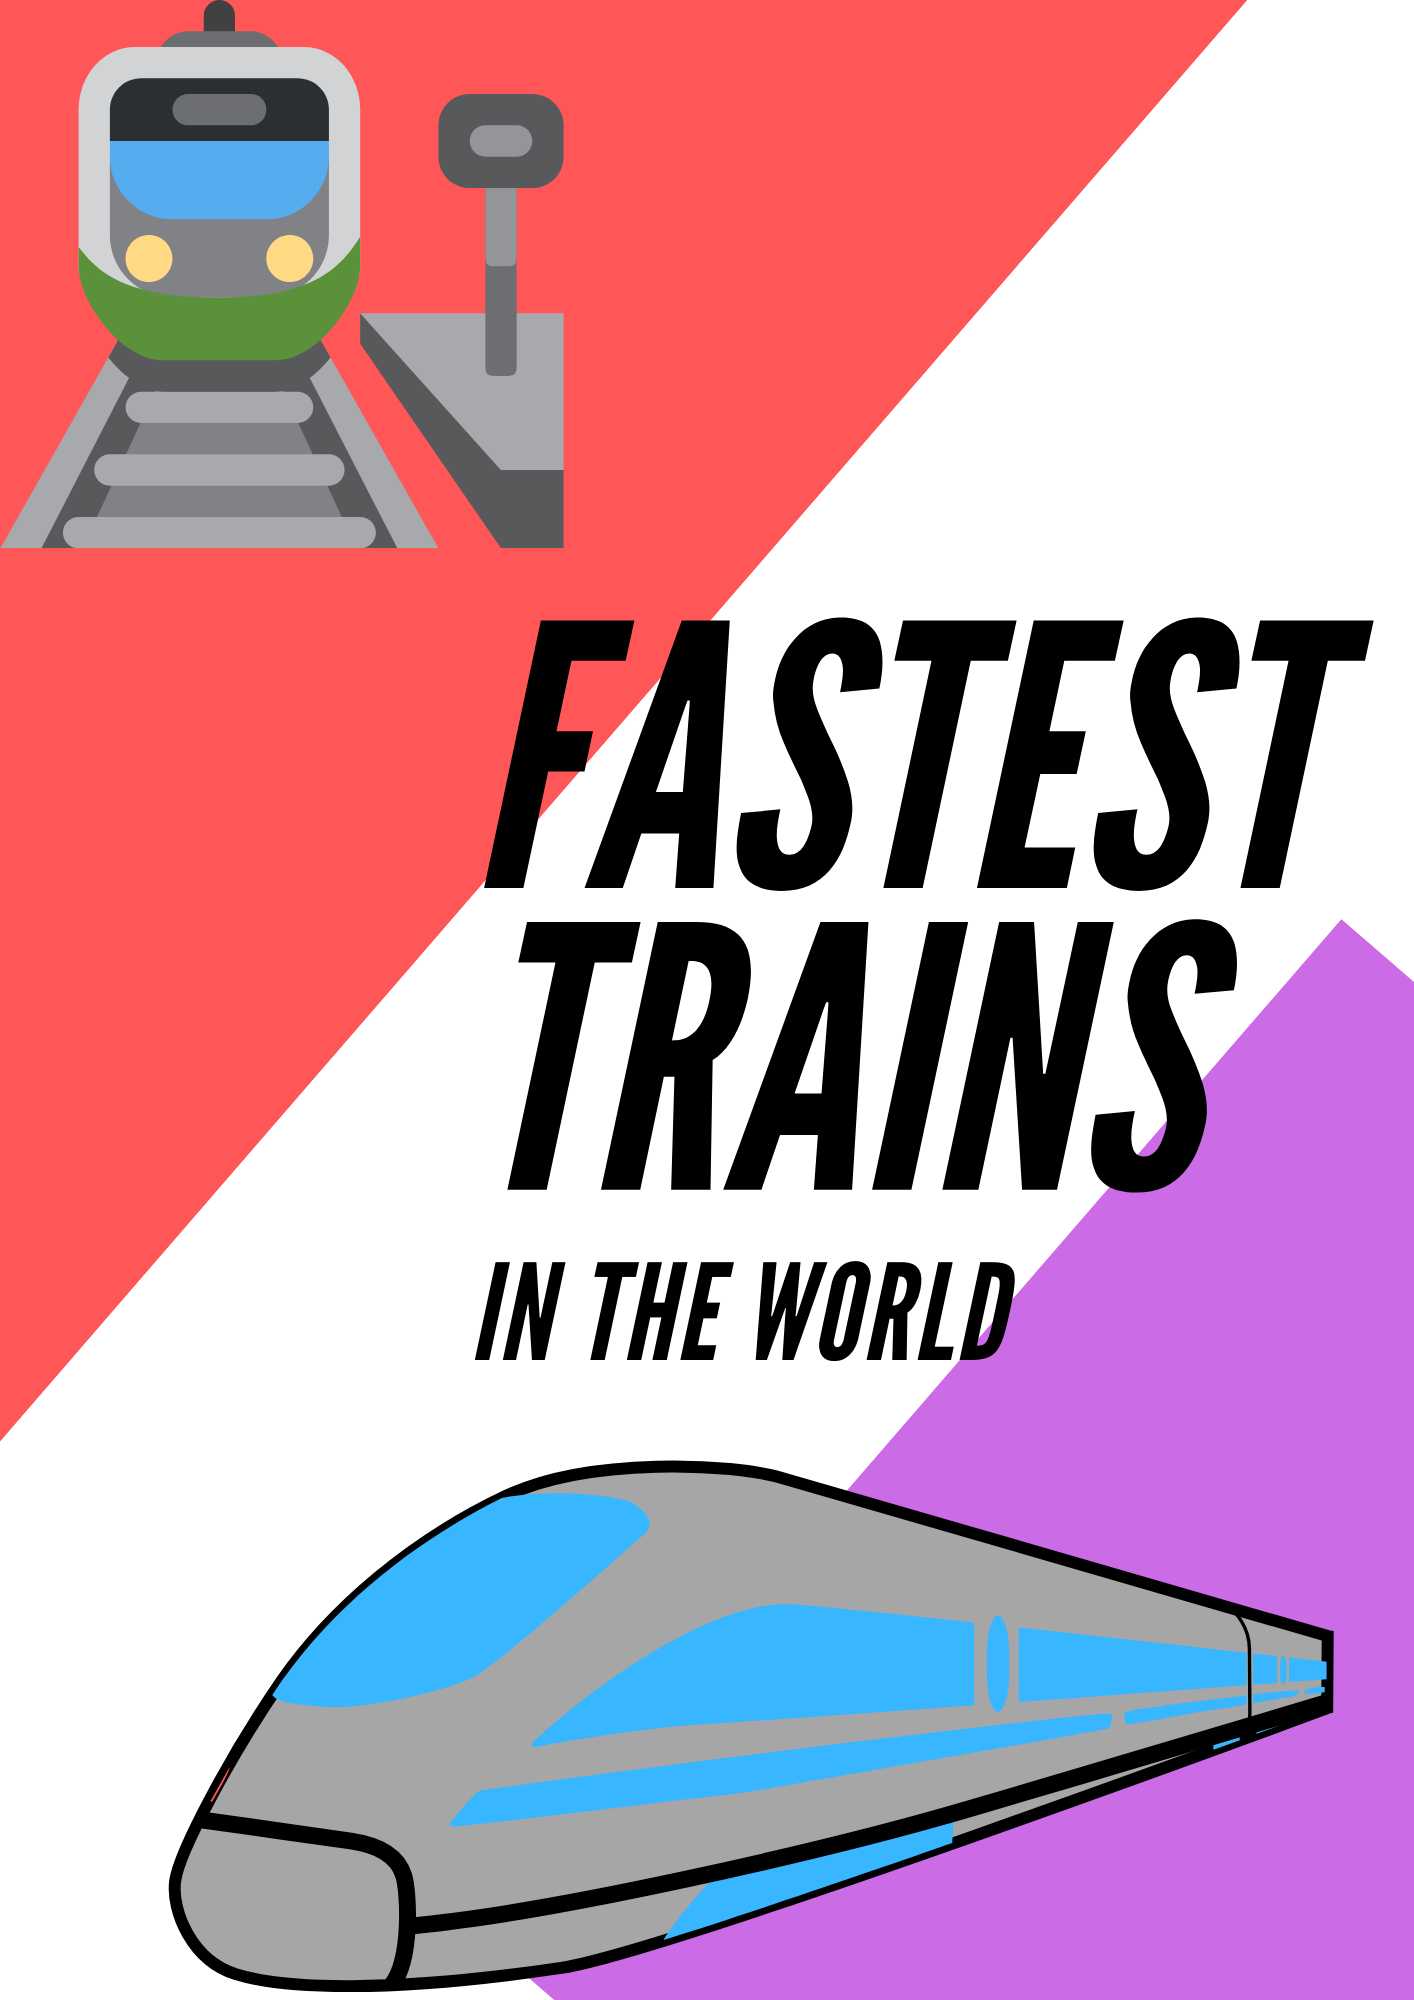 10 Fastest Trains In The World 2021